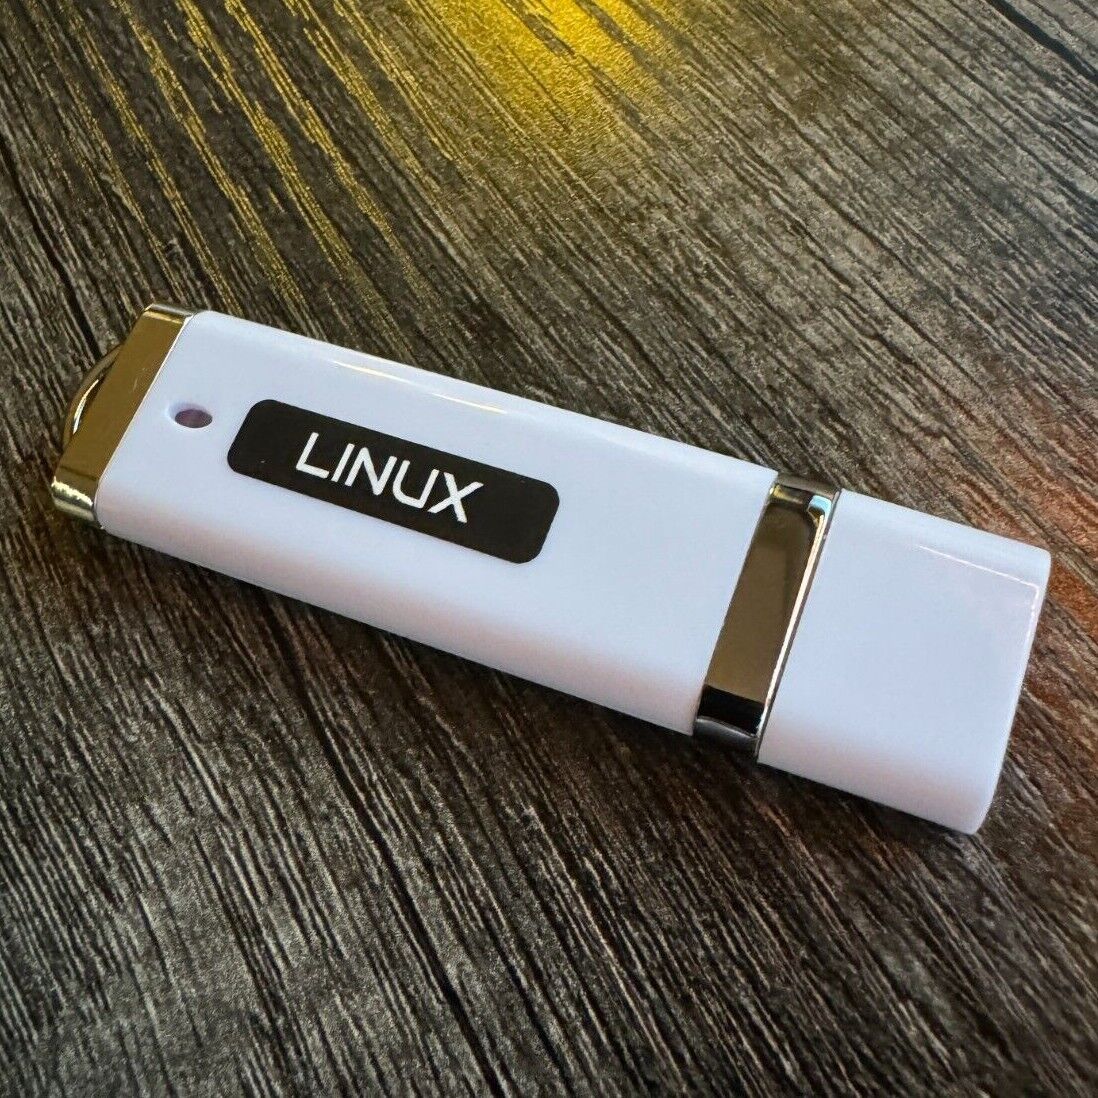 Choose a Linux OS-8GB Bootable USB Flash Drive-Mint Kali Debian Zorin and More